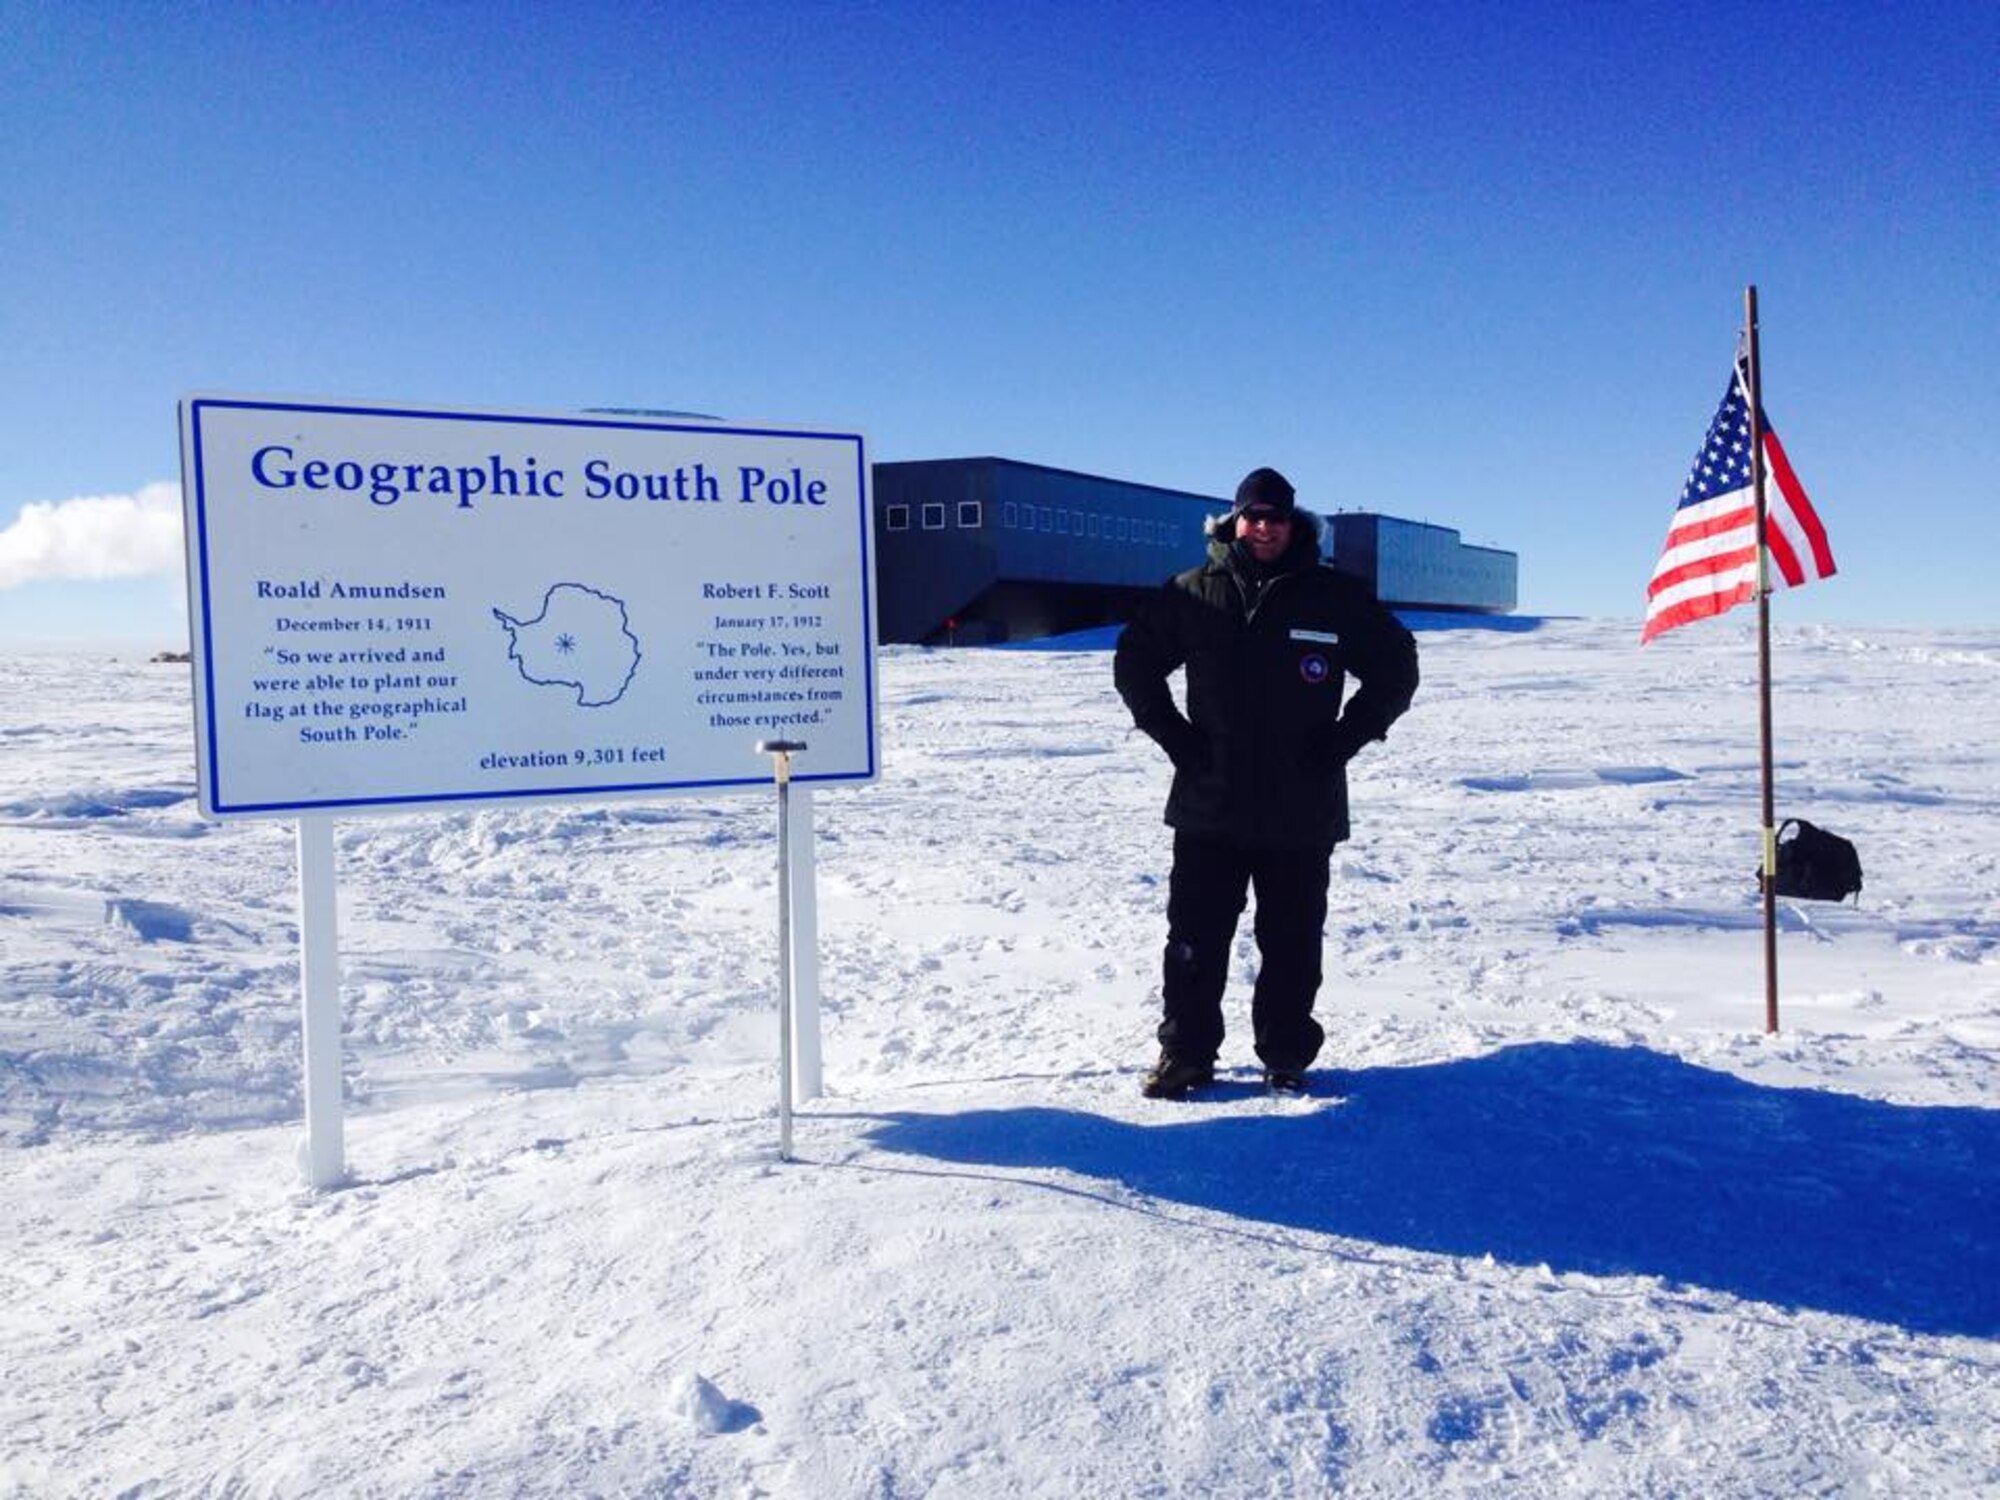 Chief Master Sgt. James W. Hotaling, the Air National Guard command chief master sergeant, poses at the geographic South Pole. Hotaling was there meeting deployed Airmen from the New York ANG's 109th Airlift Wing, who provide Airlift capability for the U.S. Antarctic Program throughout the Antarctic continent. (courtesy photo)
